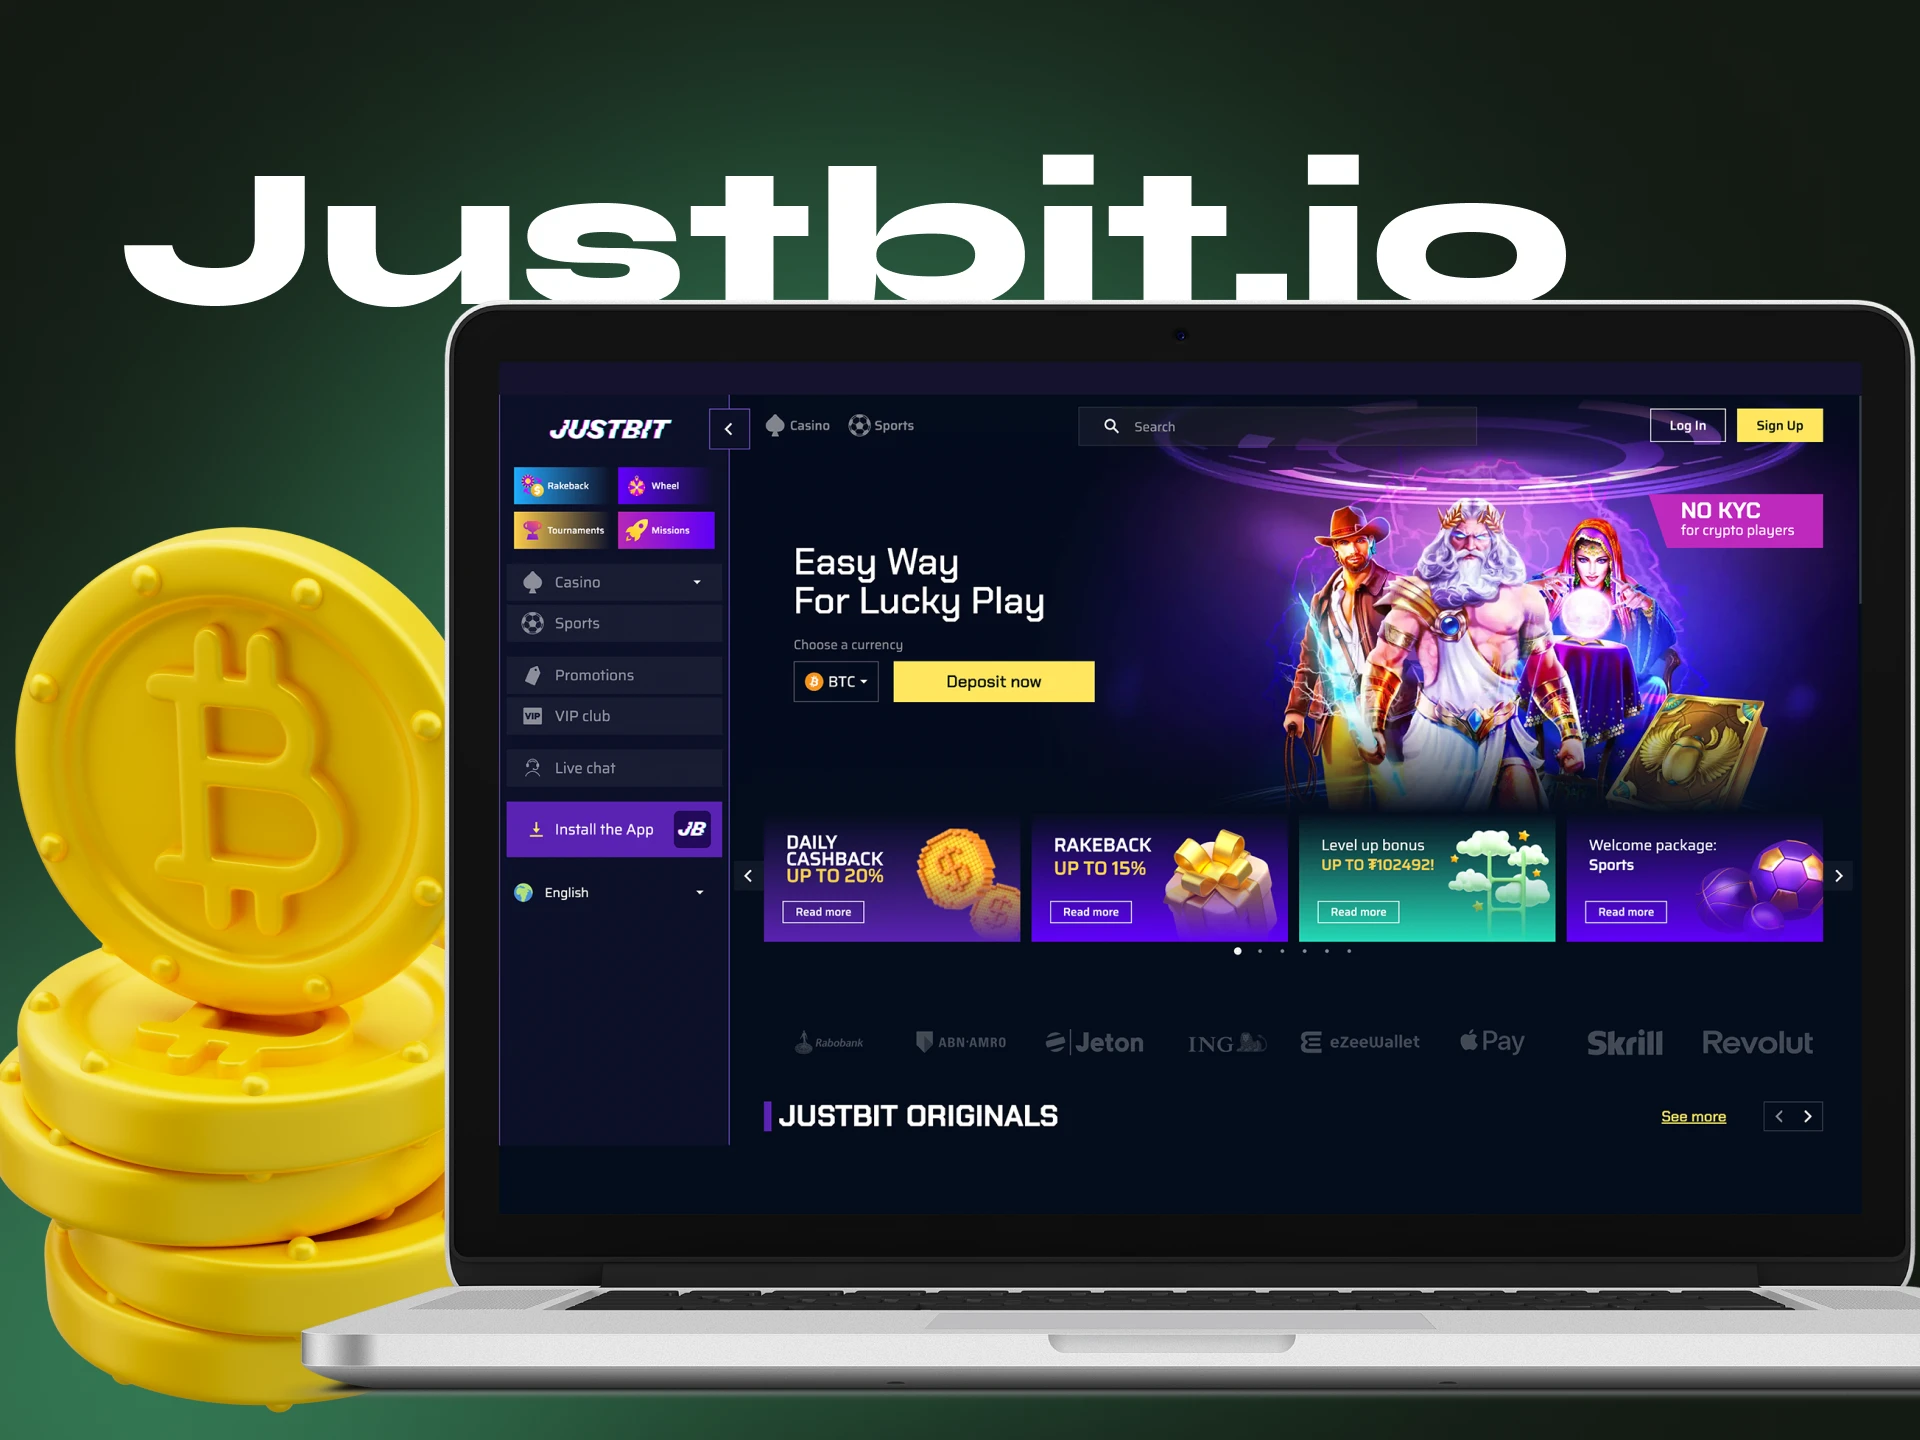 JustBit What kind of welcome bonus is there for players at JustBit Casino.